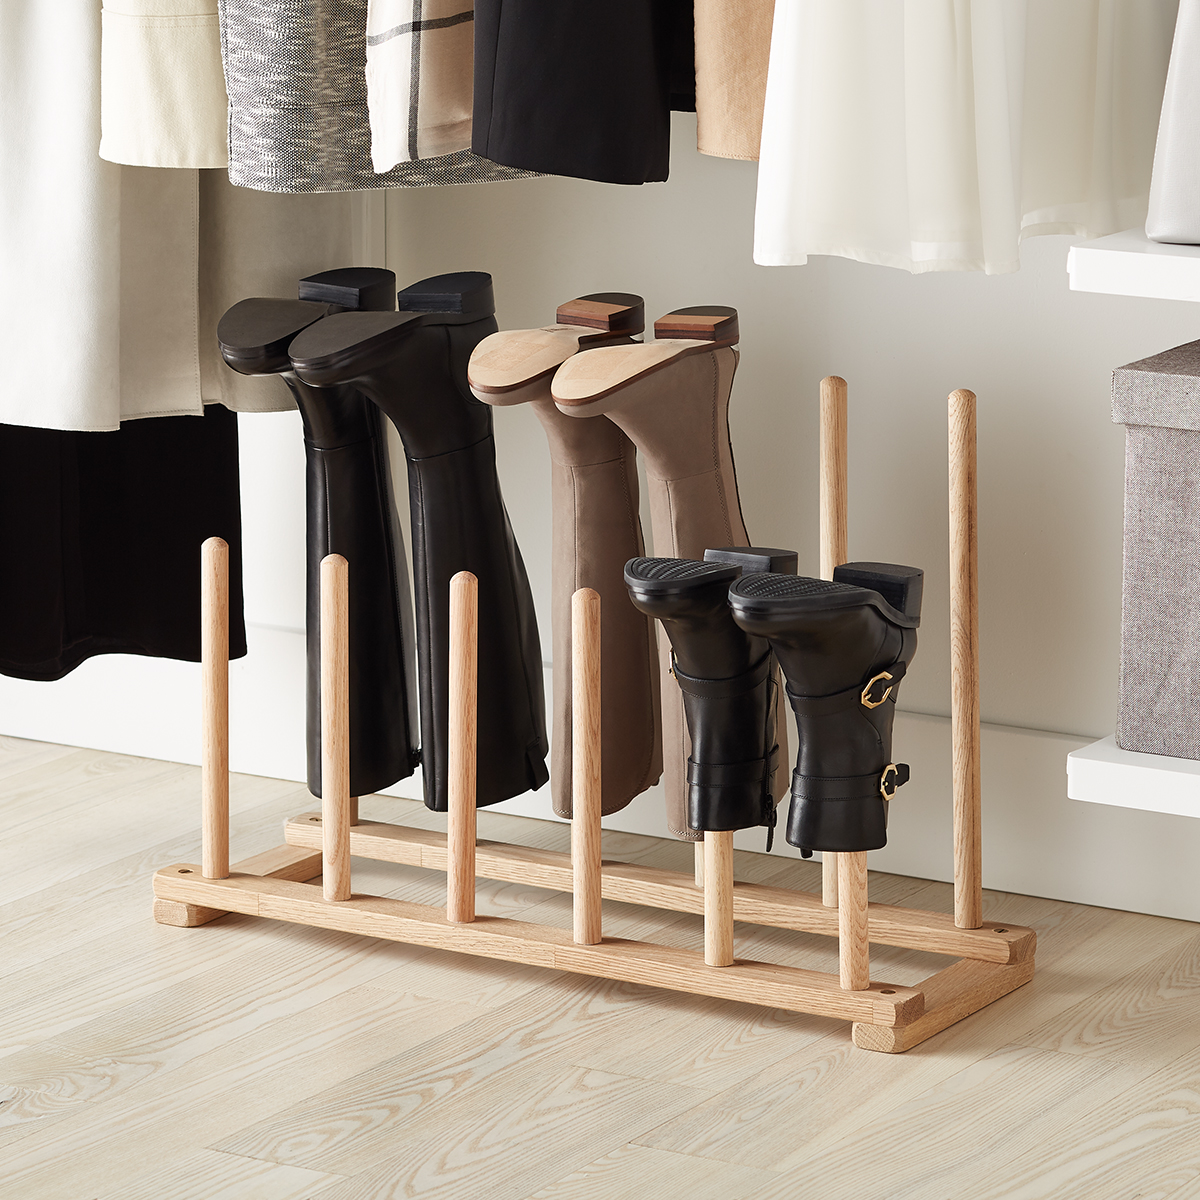 Build your own inexpensive boot rack that can store up to 8 pairs of boots!  - Your Projects@OBN